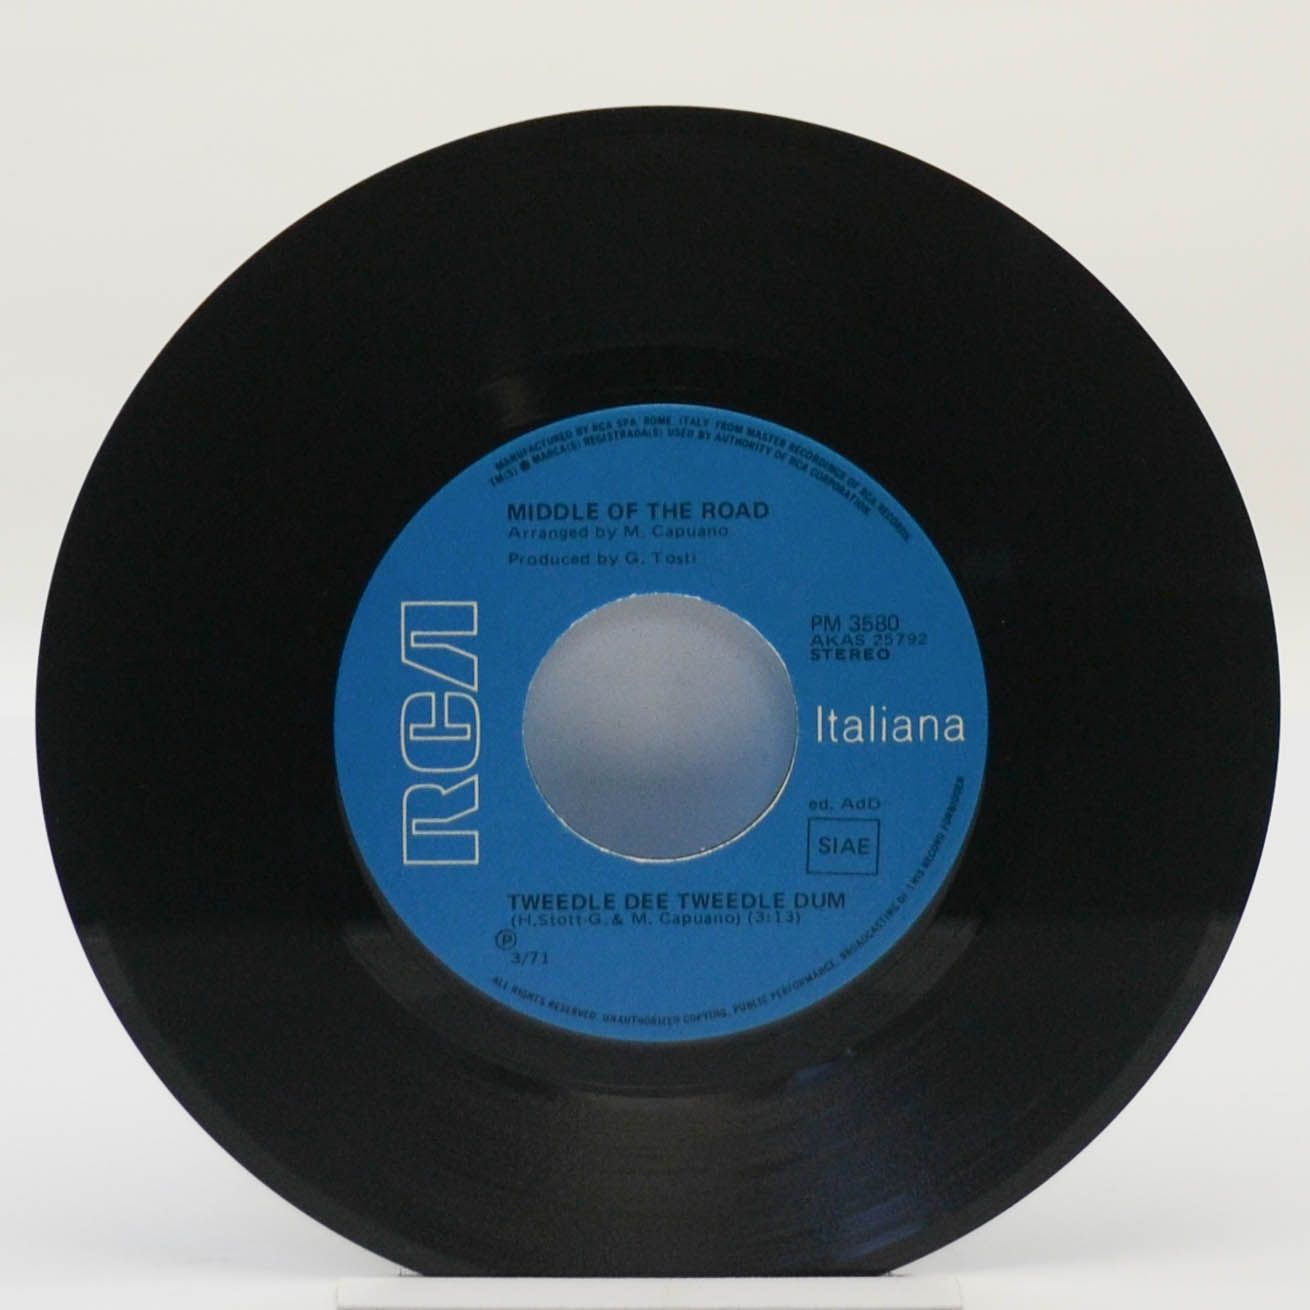 Middle Of The Road — Tweedle Dee Tweedle Dum / Give It Time (single), 1971